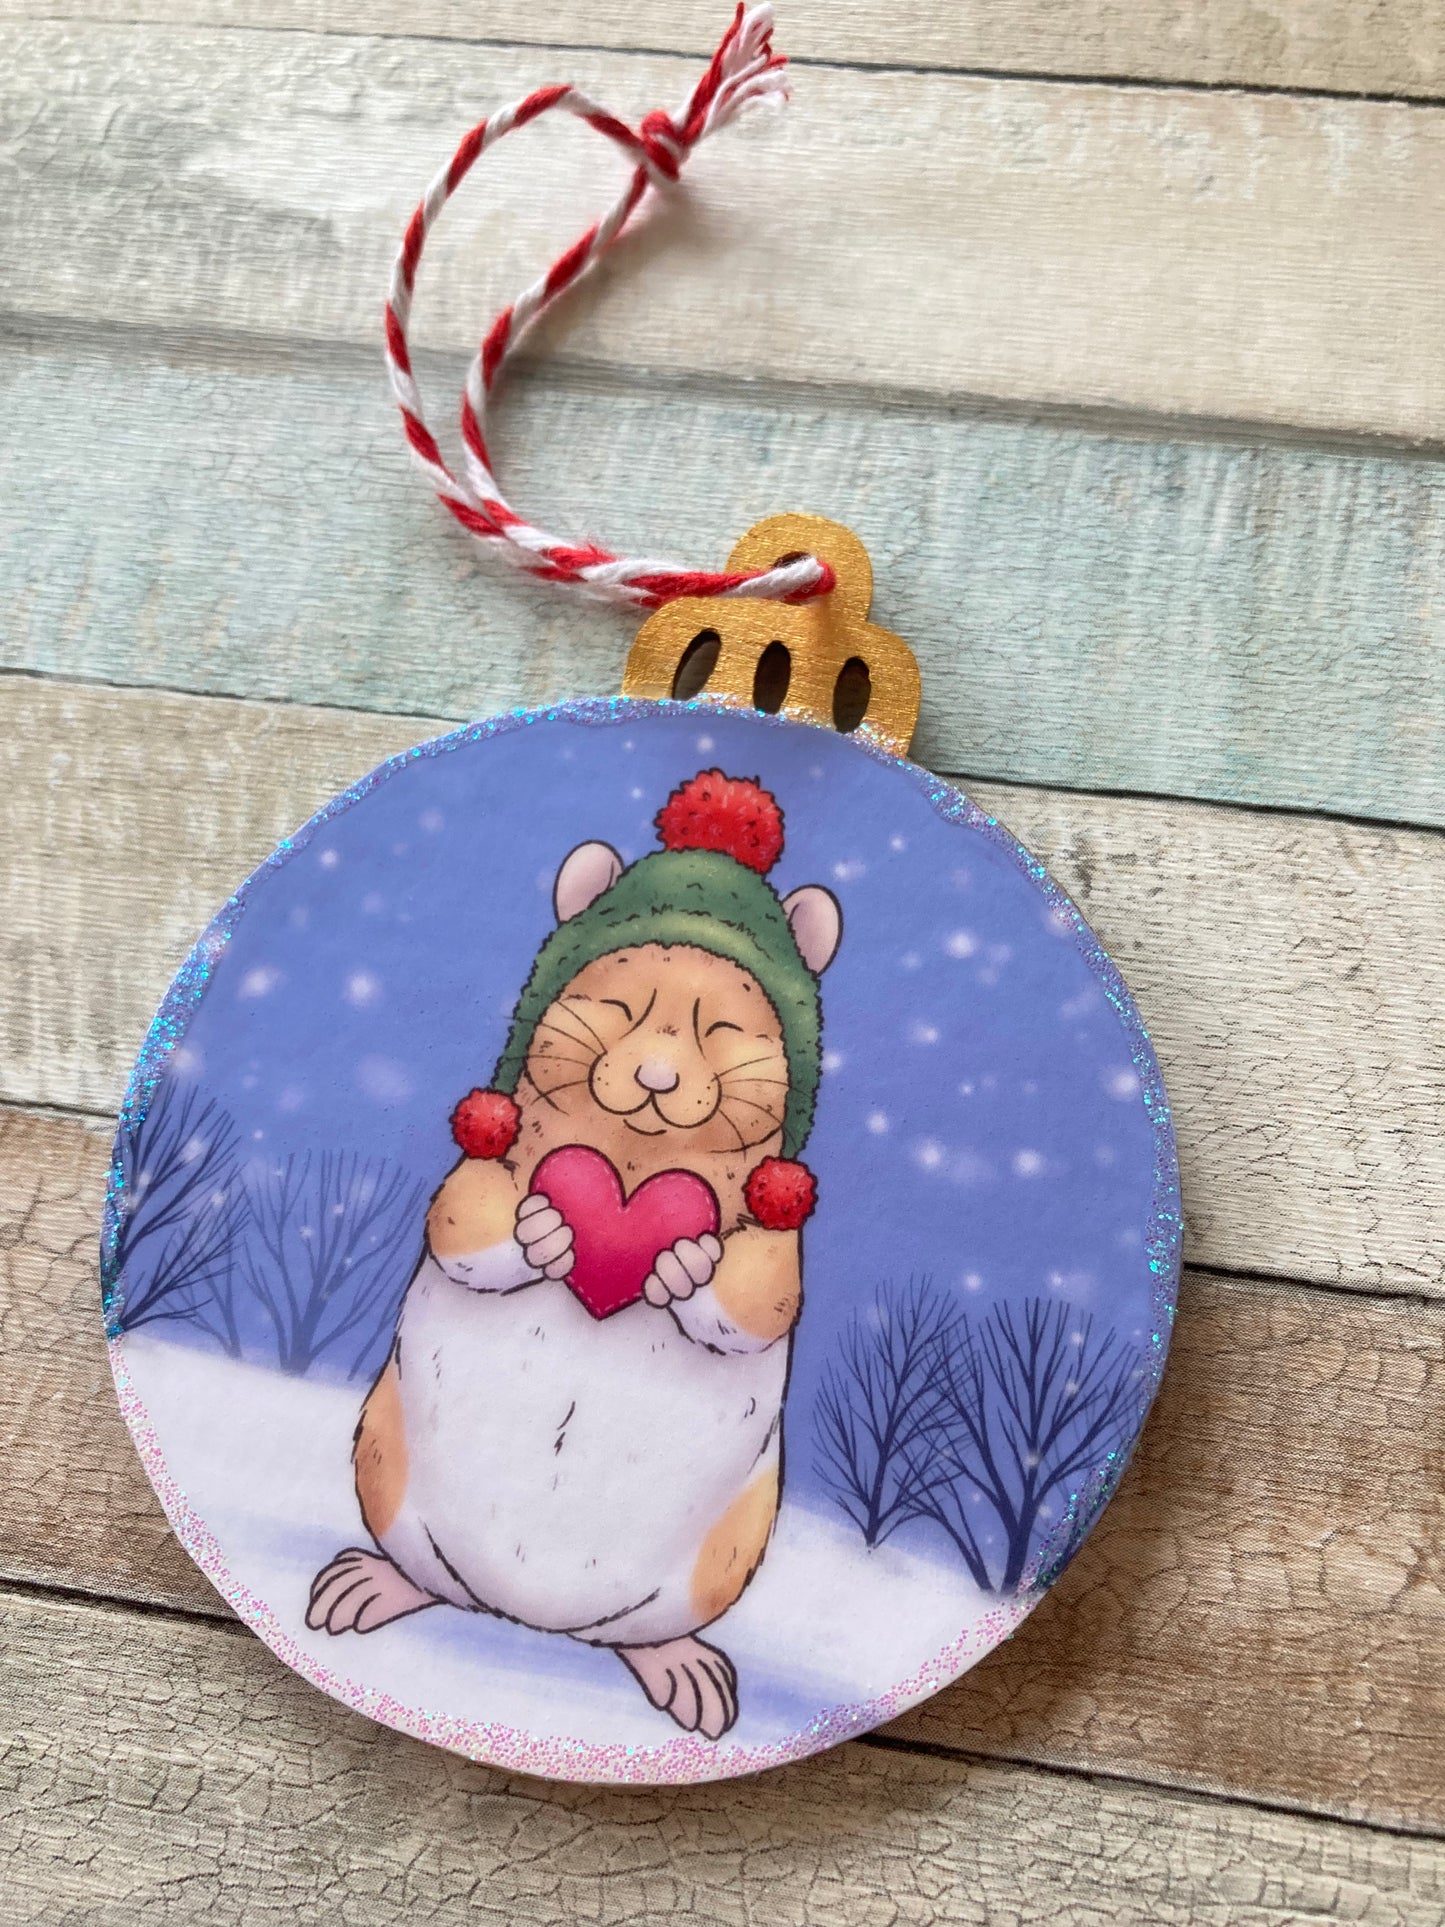 Warm Hammy Wishes | Cute Hamster Christmas Tree Bauble